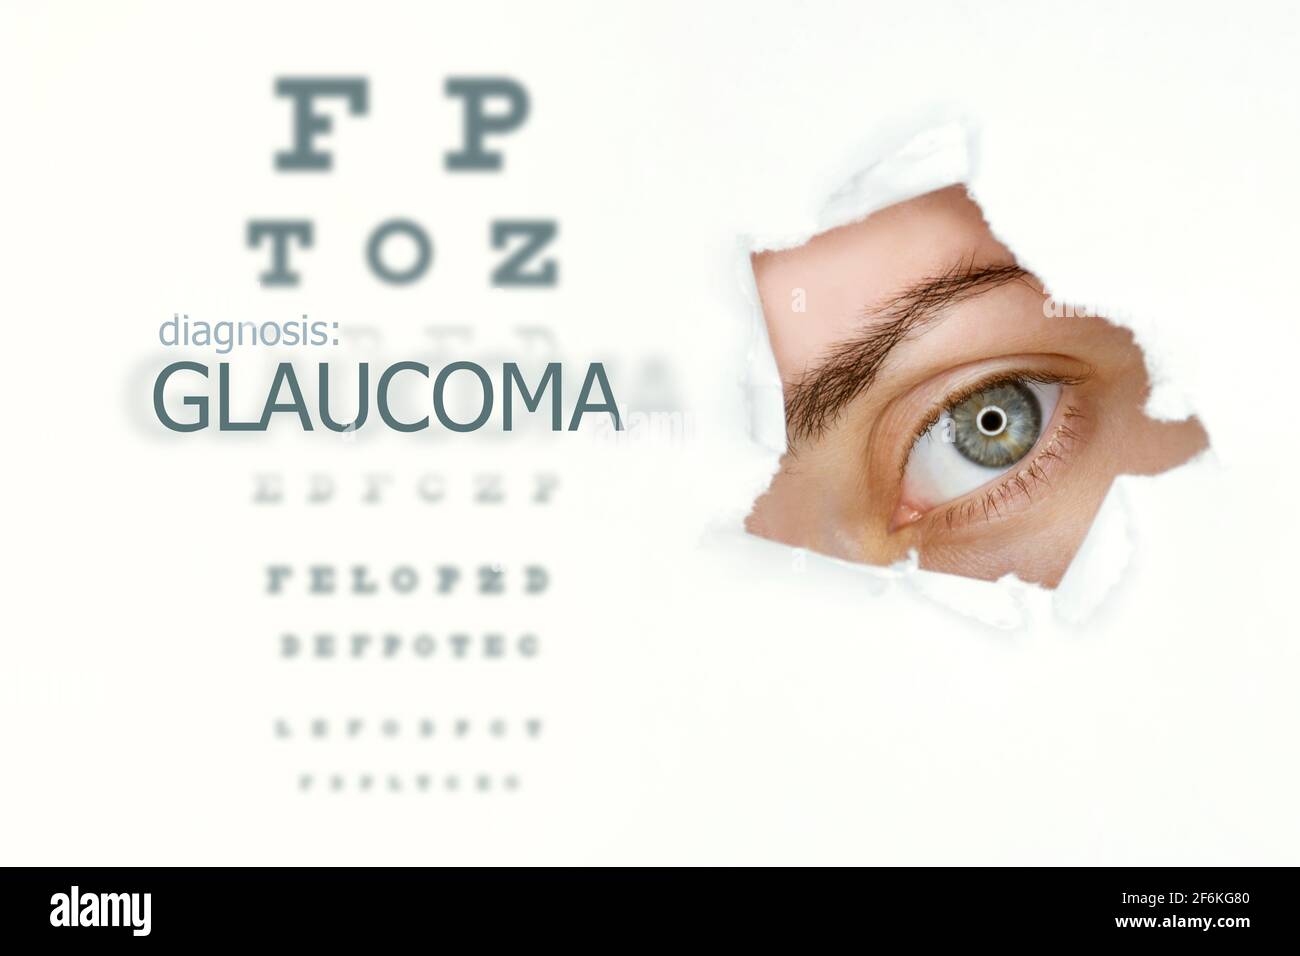 Woman`s eye looking trough teared hole in paper, eye test and word Glaucoma on left. Eye disease concept template. Isolated white background. Stock Photo